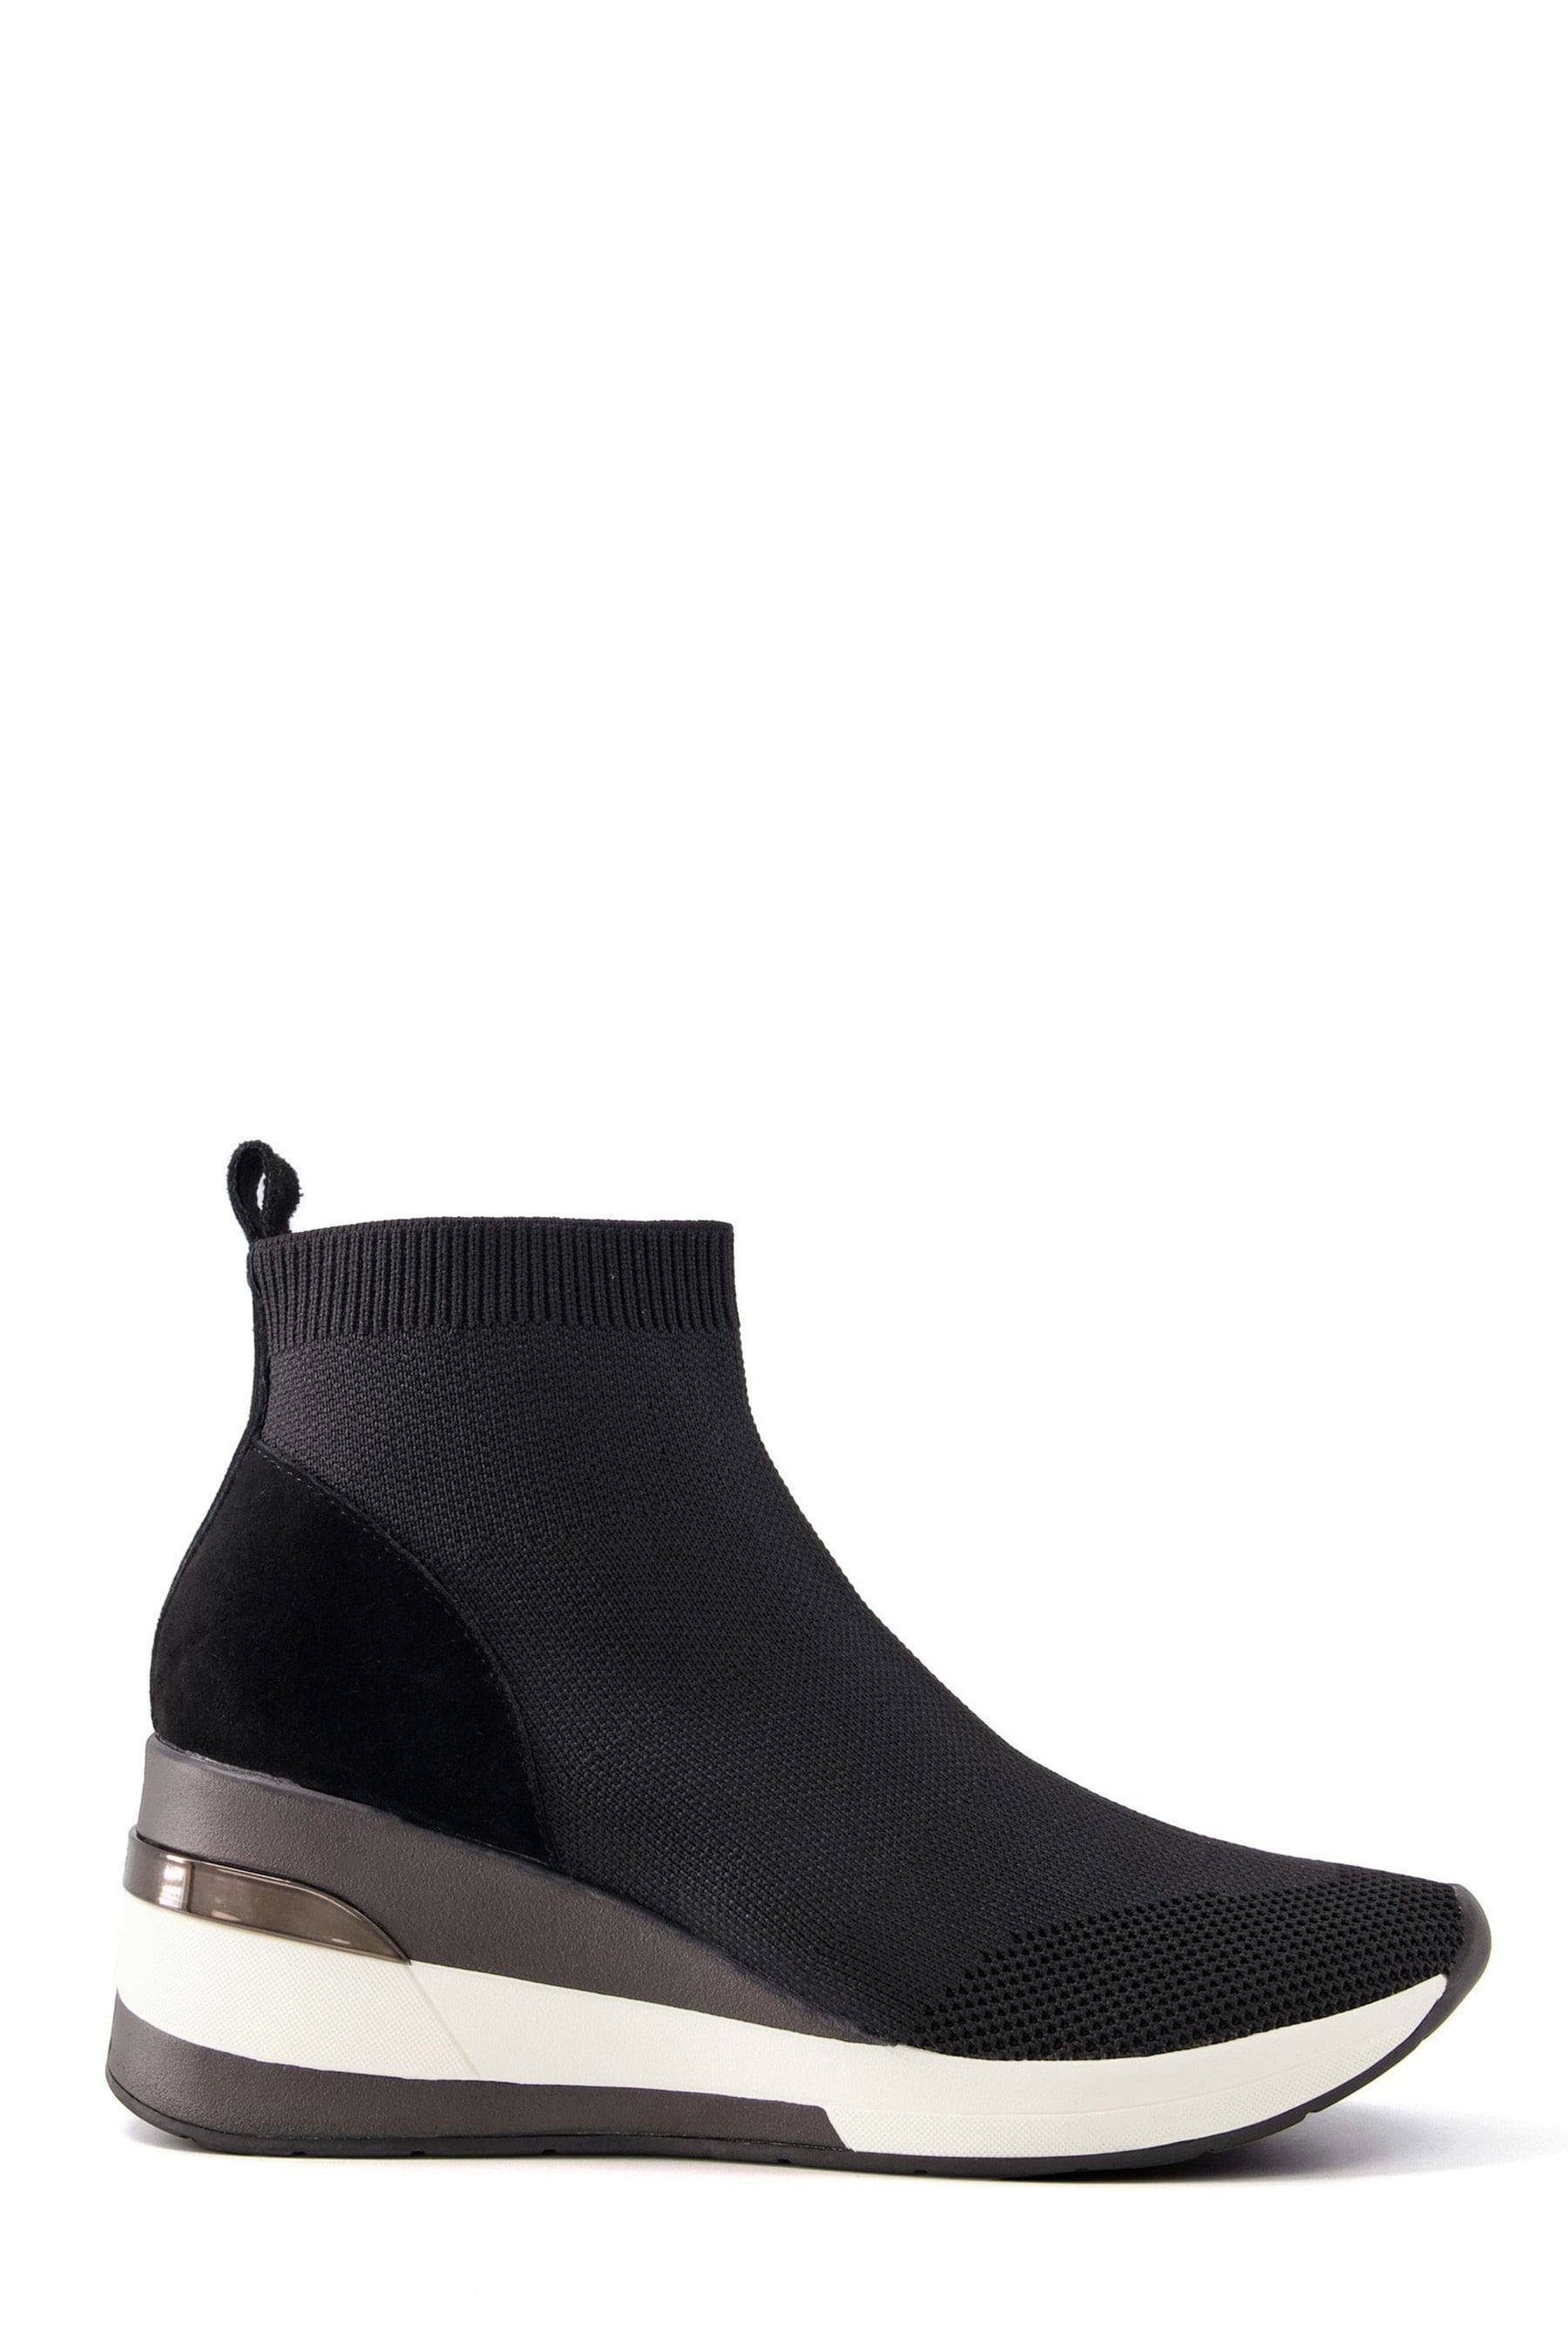 Buy Dune London Black Wide Fit Engel Sock Boot Wedge Trainers from the ...